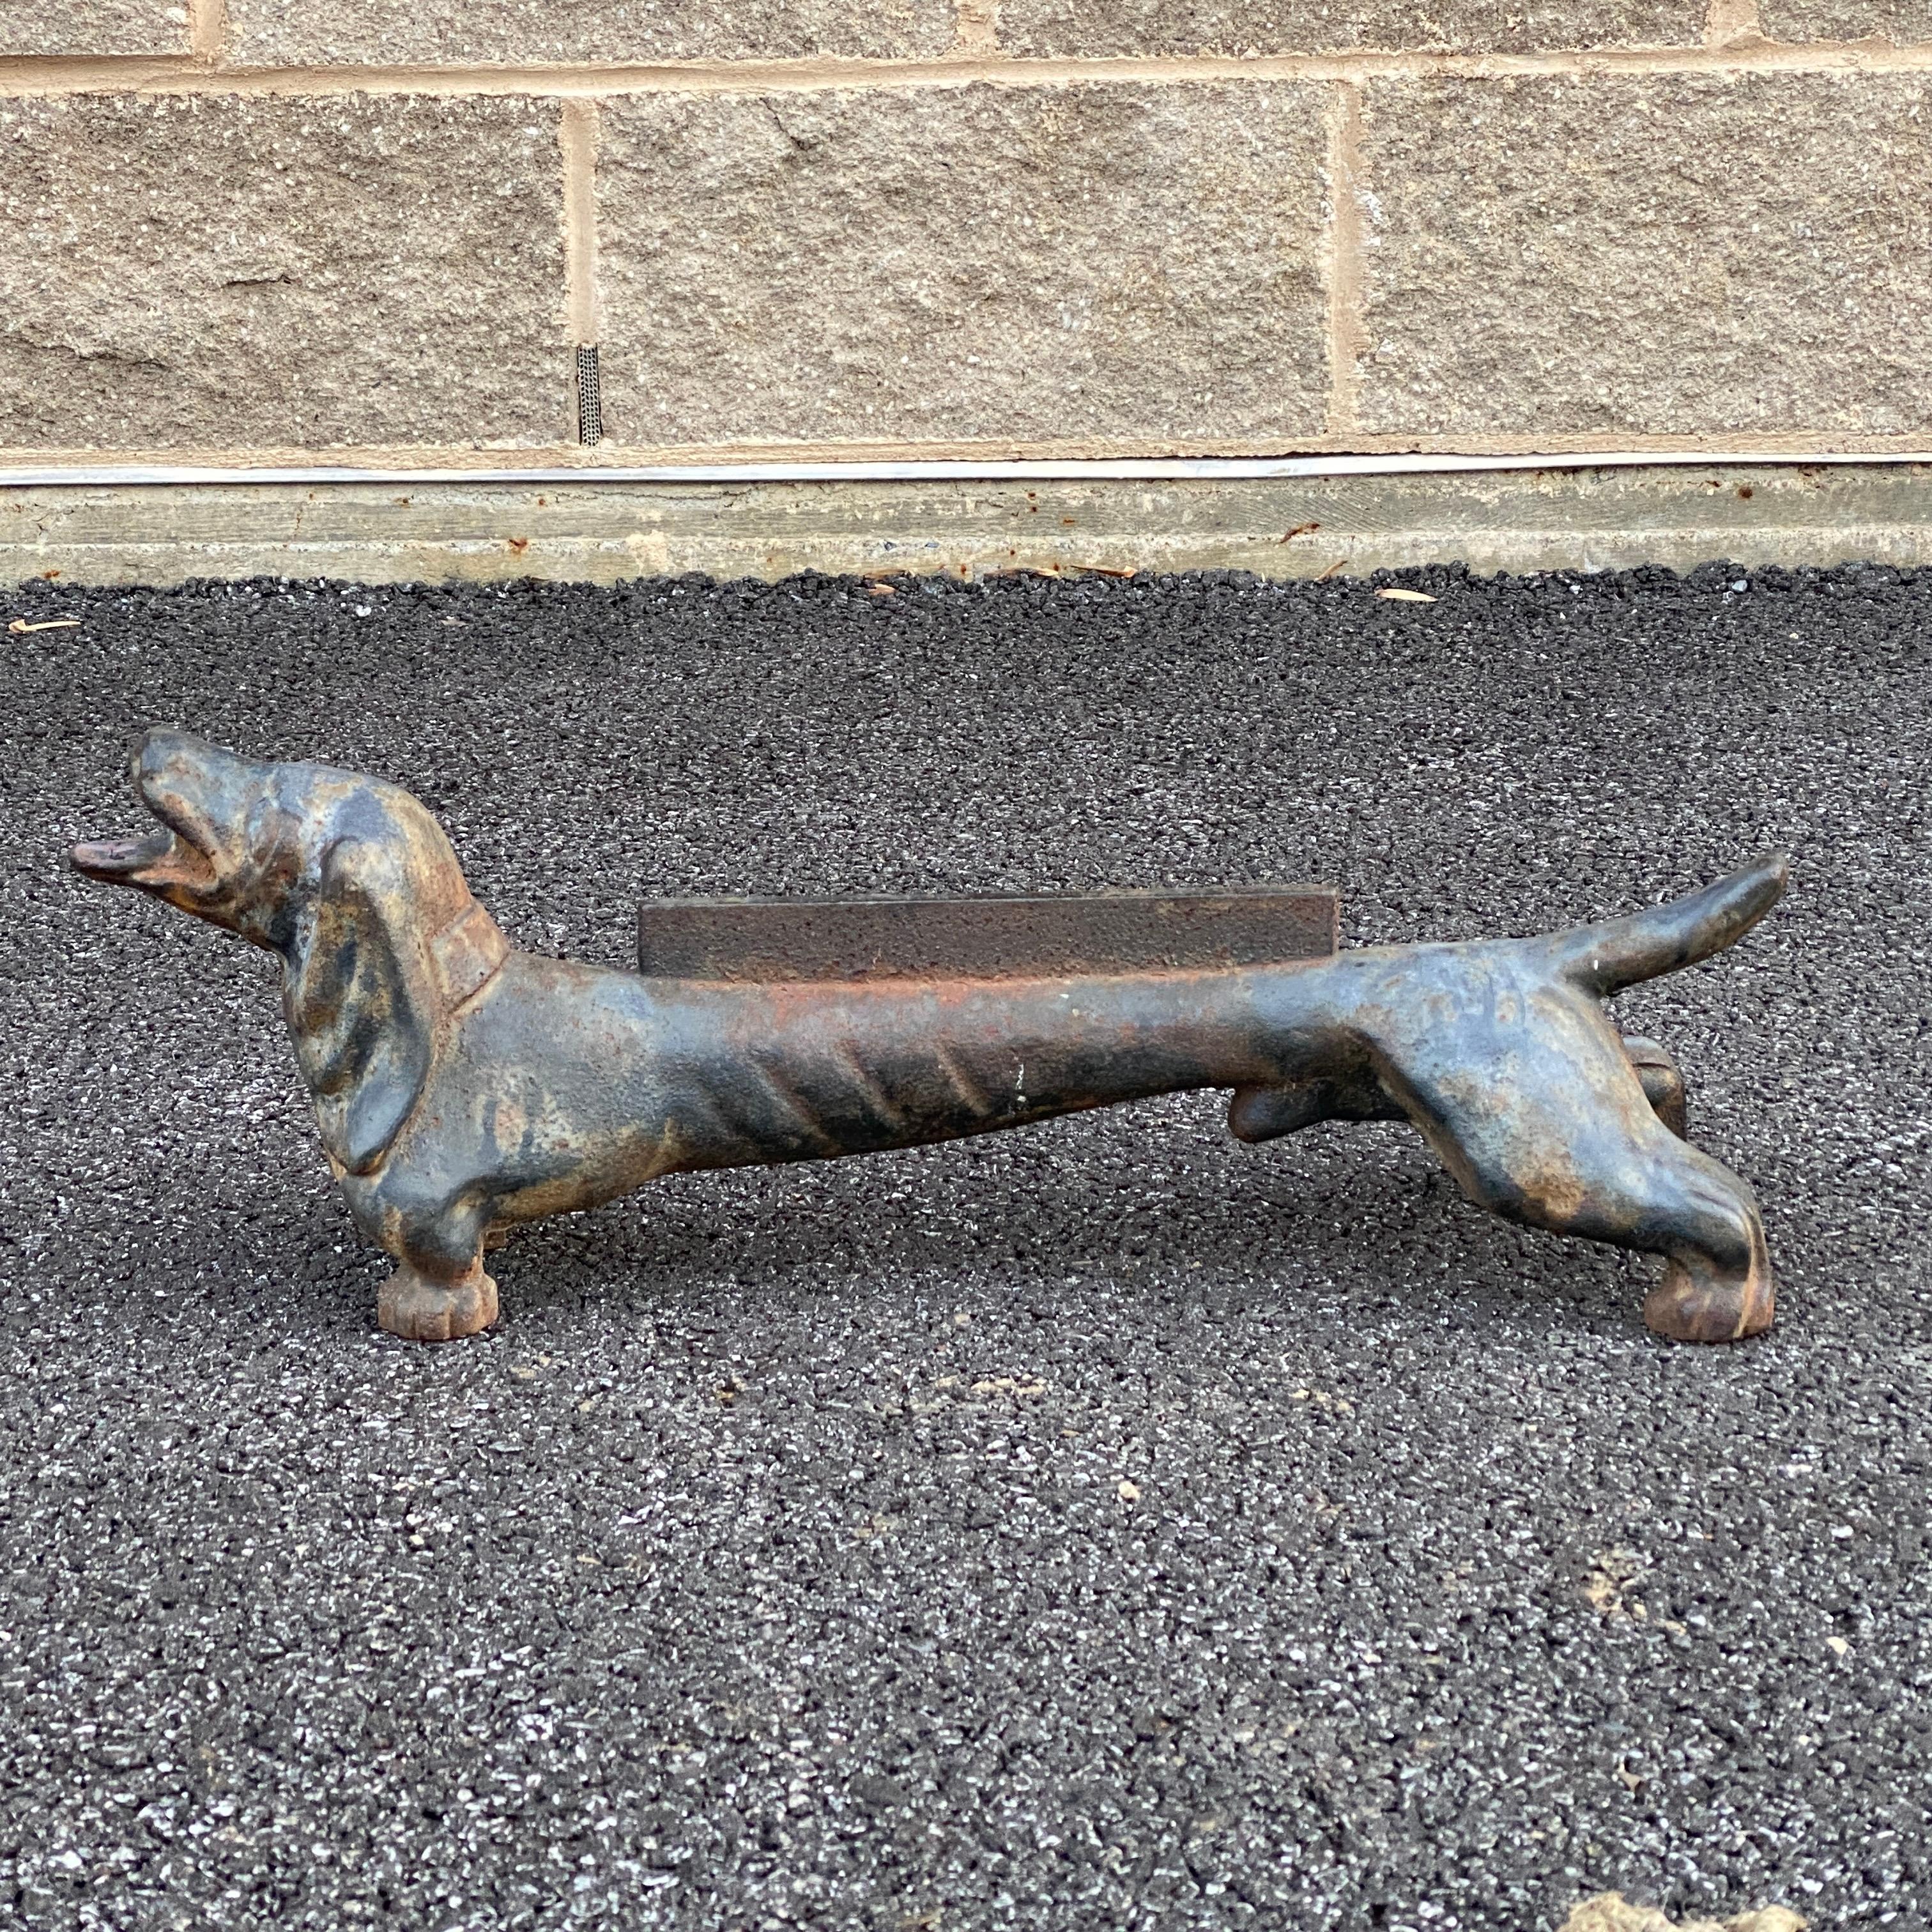 An antique heavy cast iron boot scraper in the from of a dachshund dog. Scraper section is 9.25” long